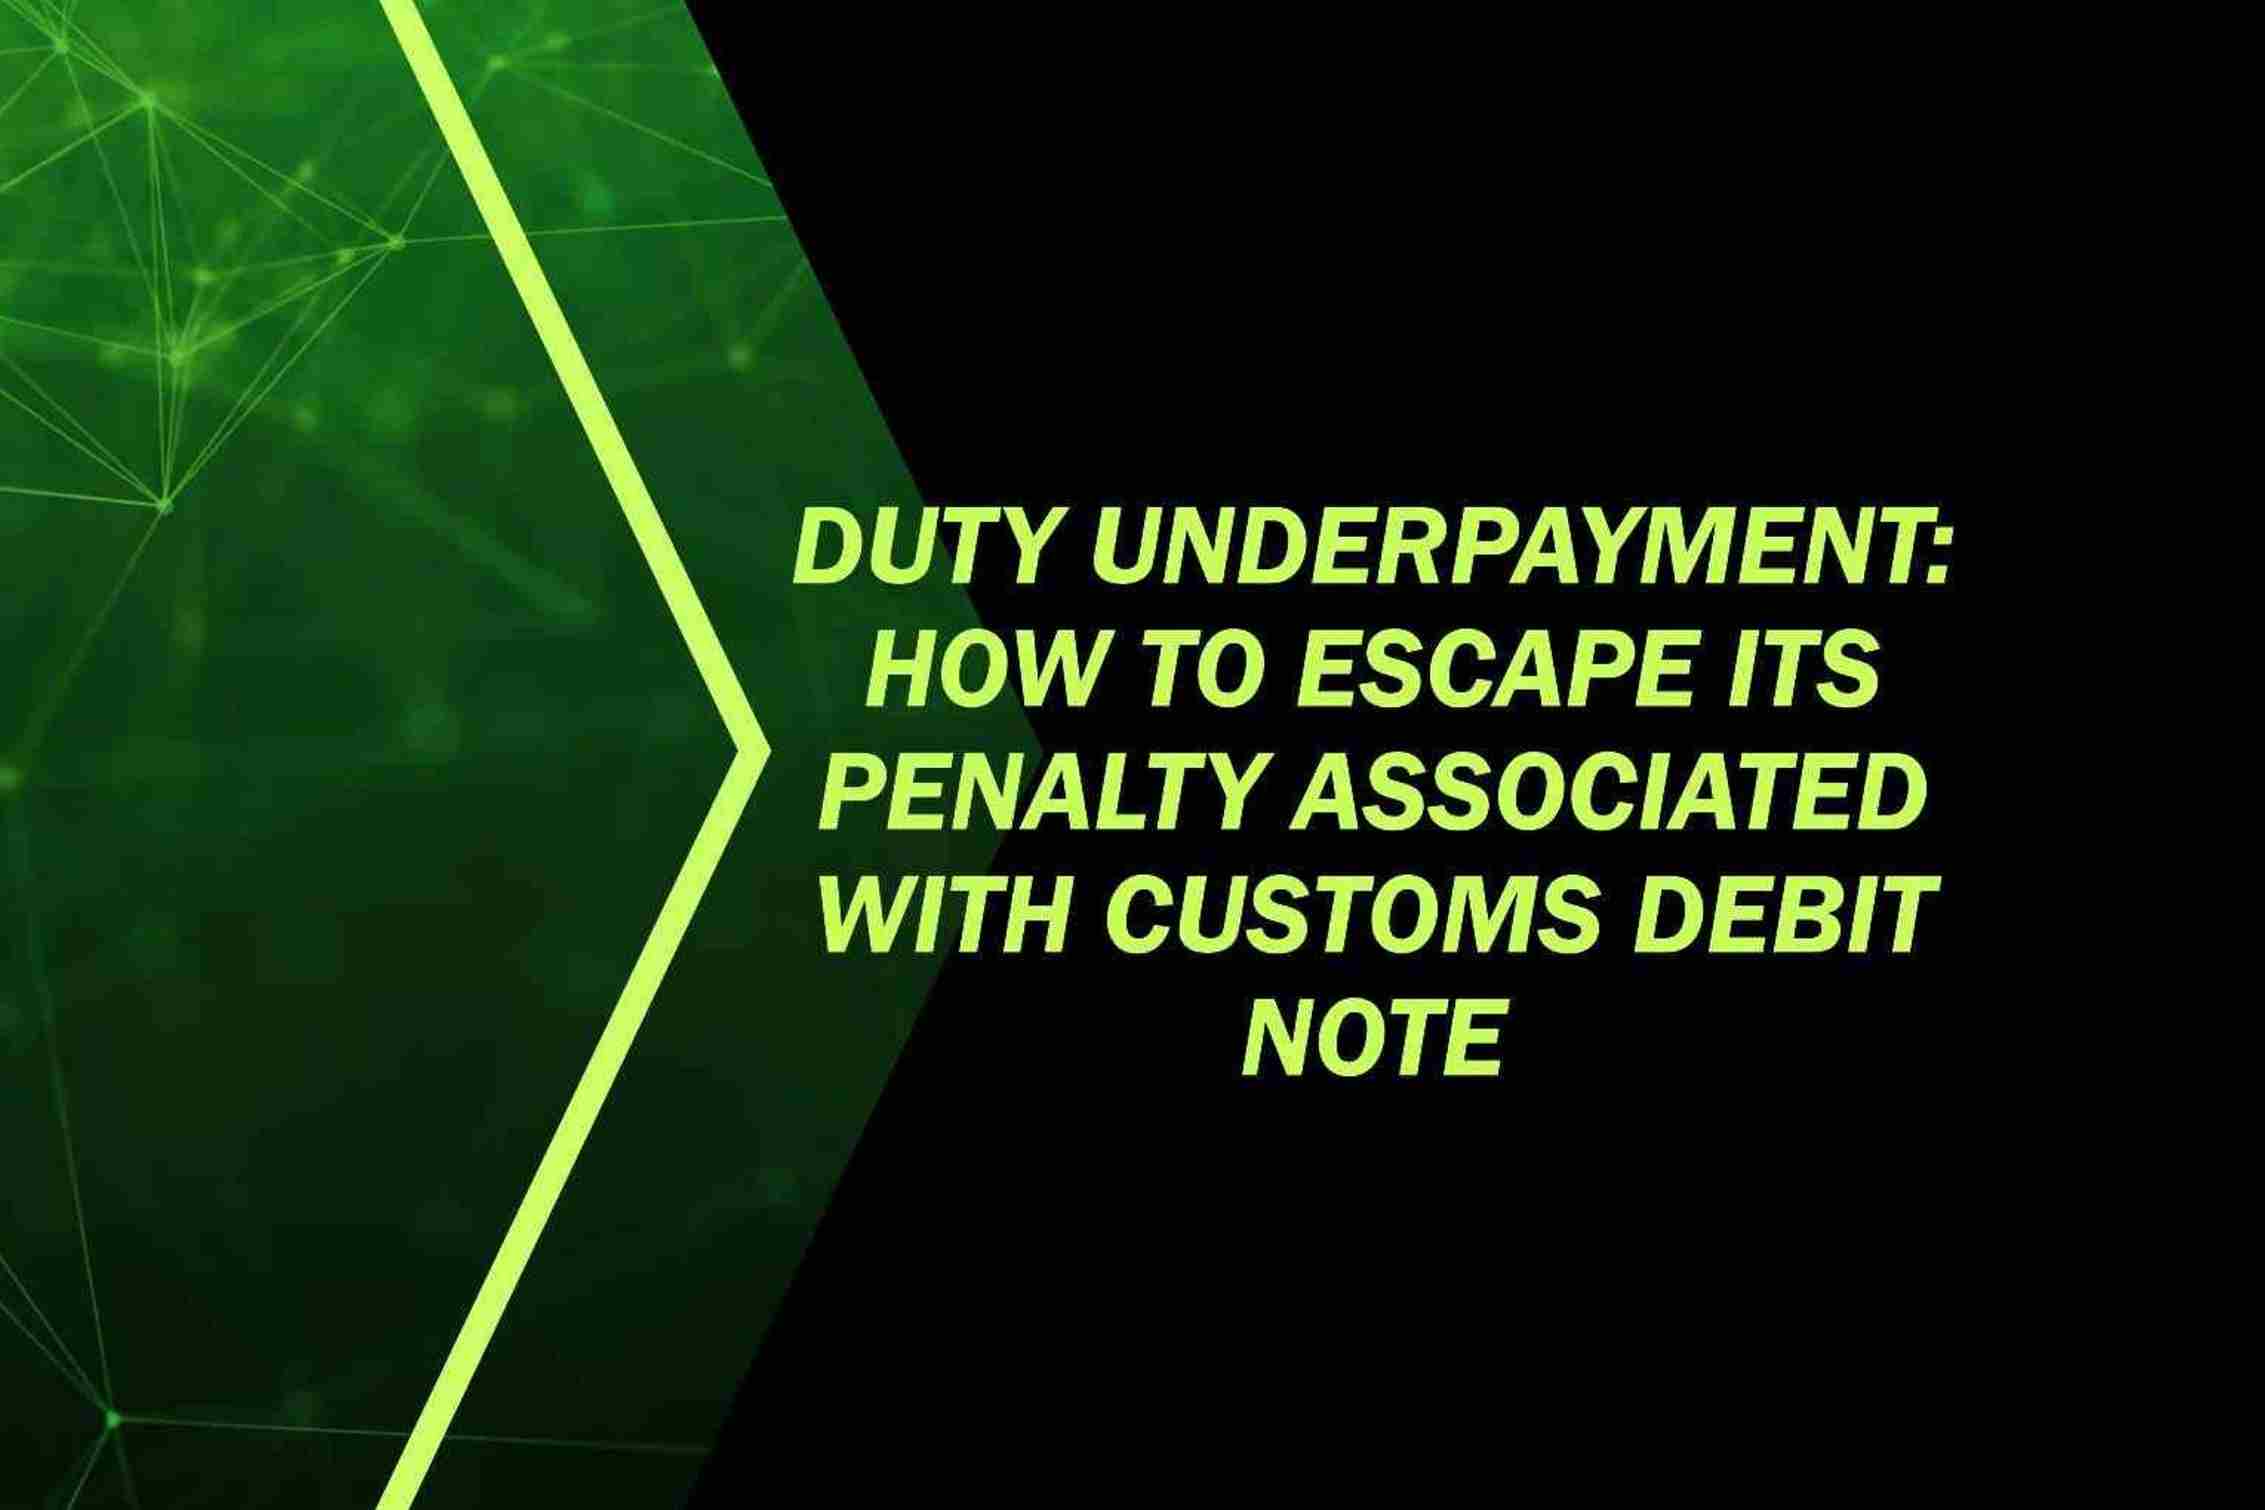 Duty Underpayment: How to Escape its Penalty Associated with Customs Debit Note